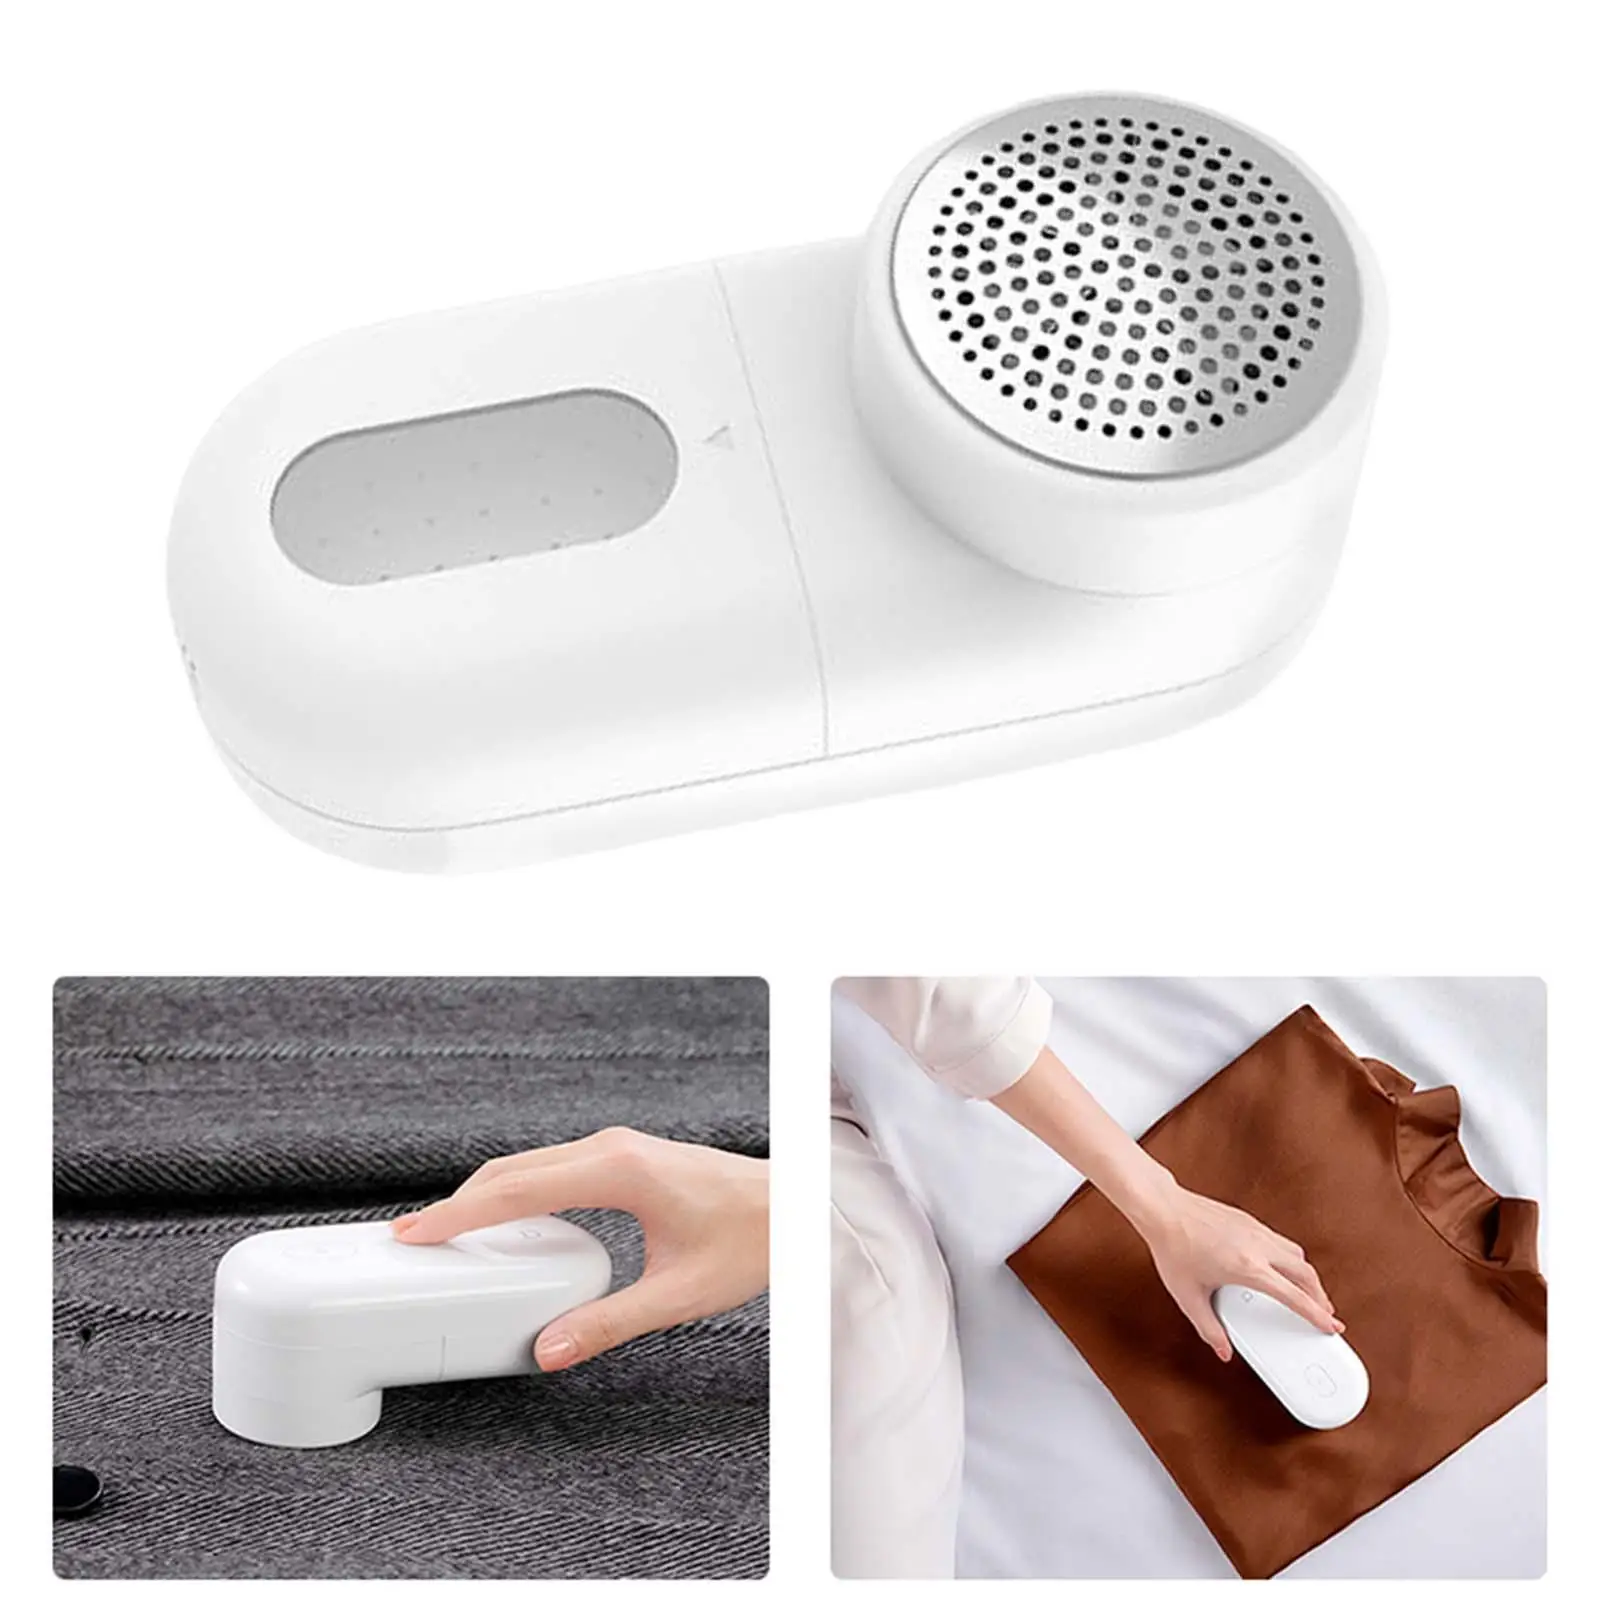 Lint Remover USB Rechargeable 5 Leaf Blades Pet Hair Pilling Remover Tool Clothes Fuzz Remover Bedding Wool Socks Flannel